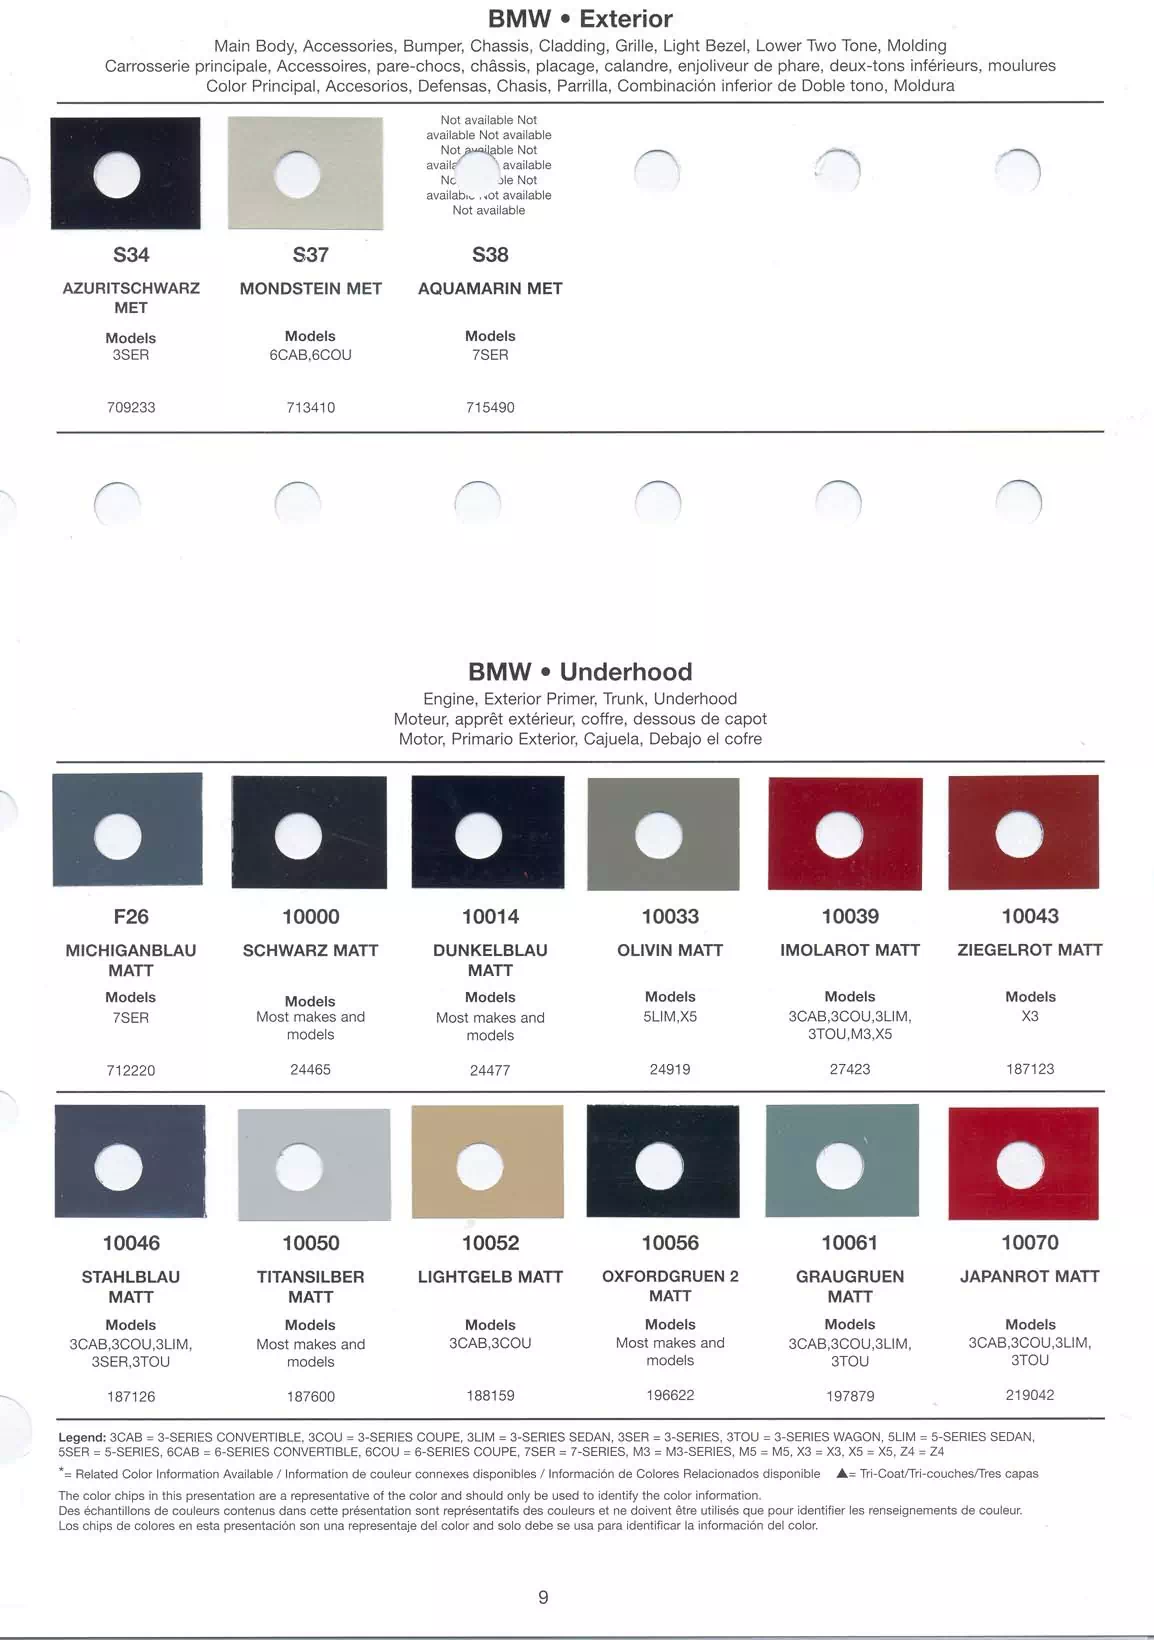 paint charts for main body, underhood and accent colors for 2005 bmw vehicles